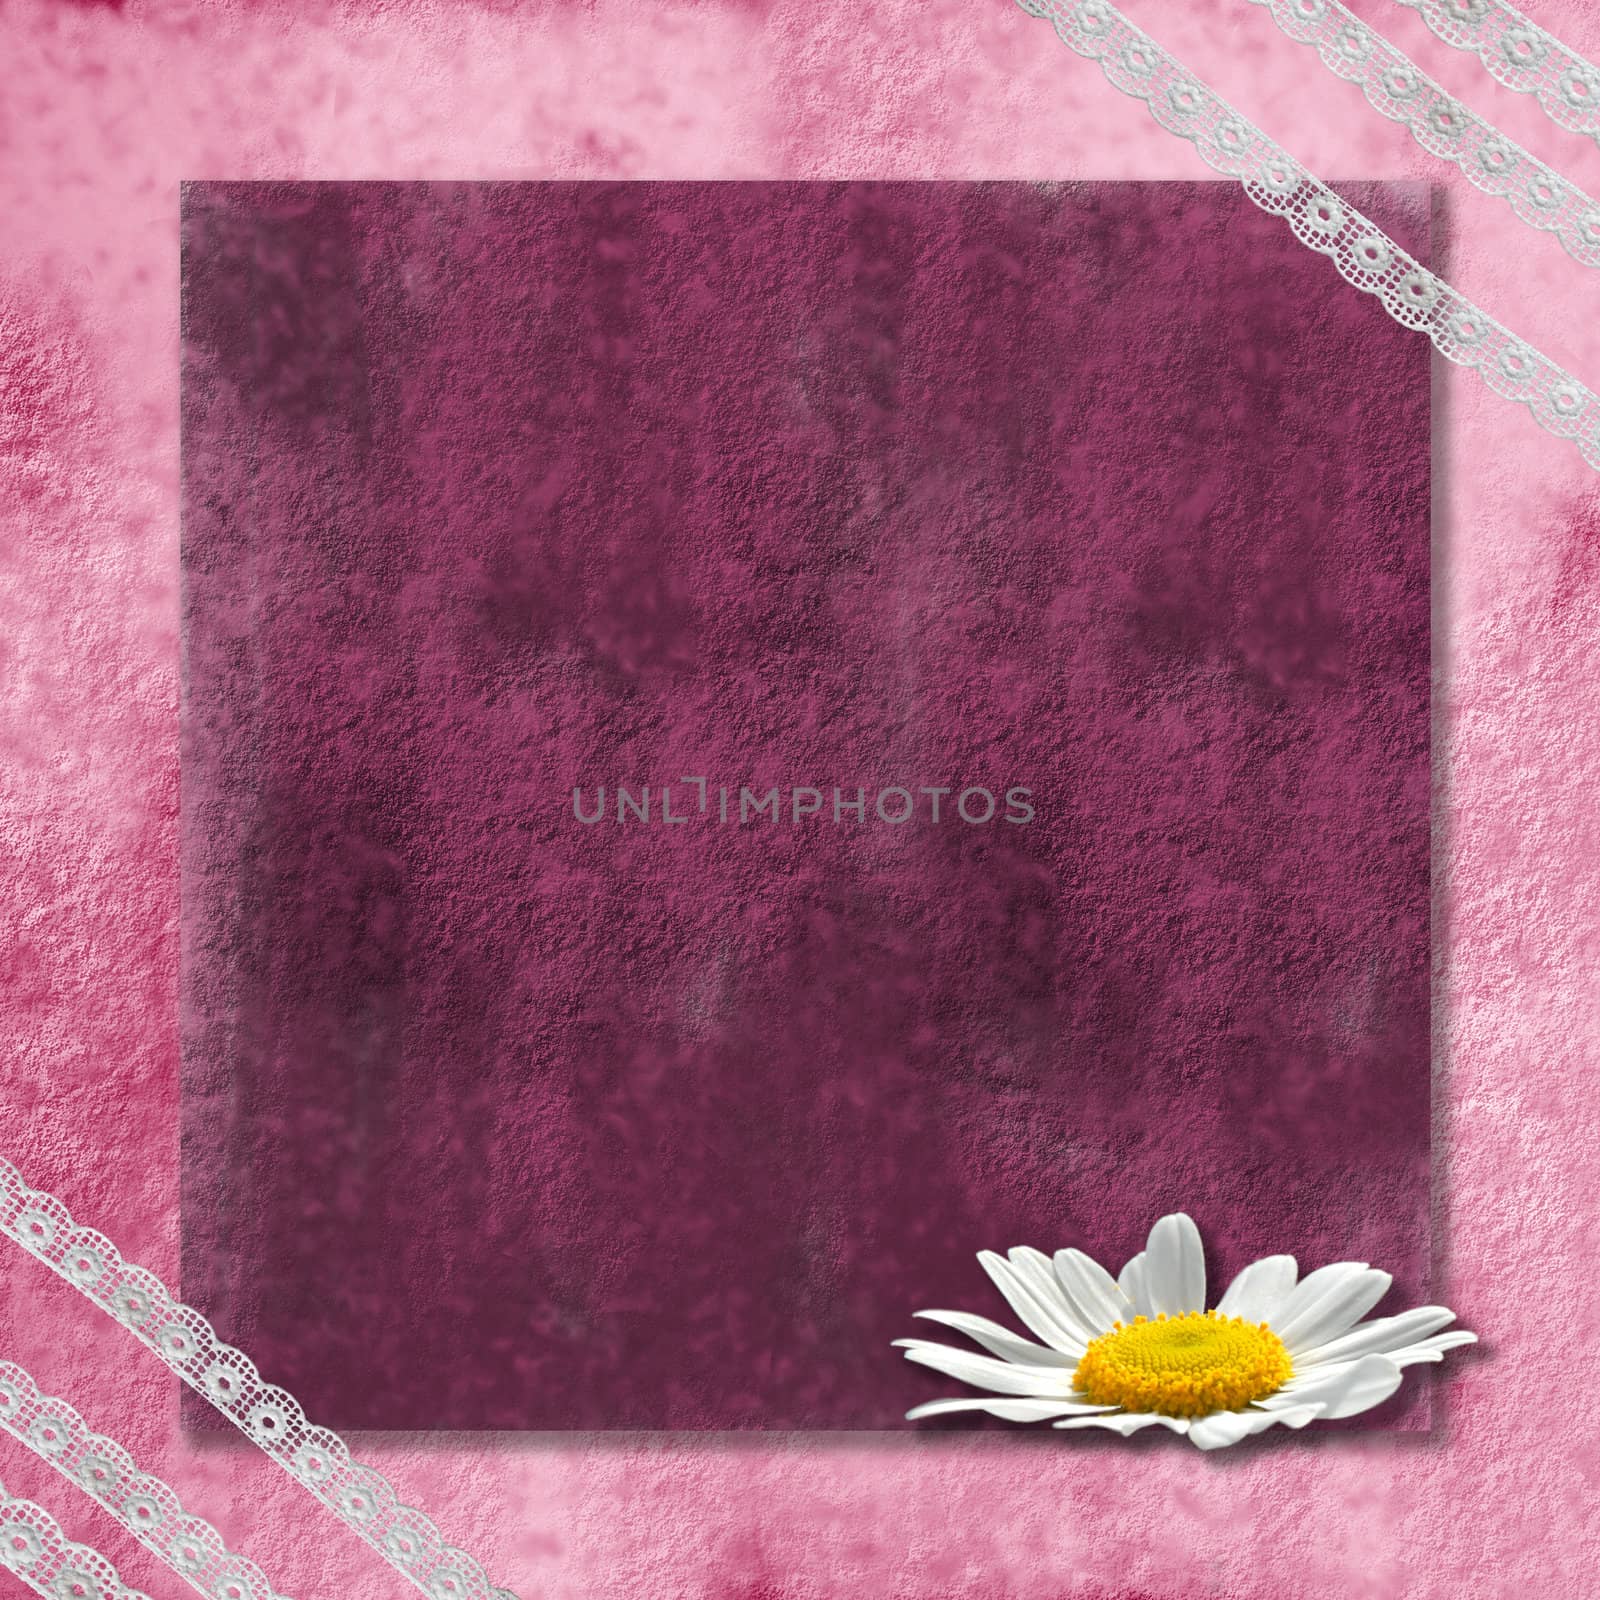 pink background with a daisy and old lace 